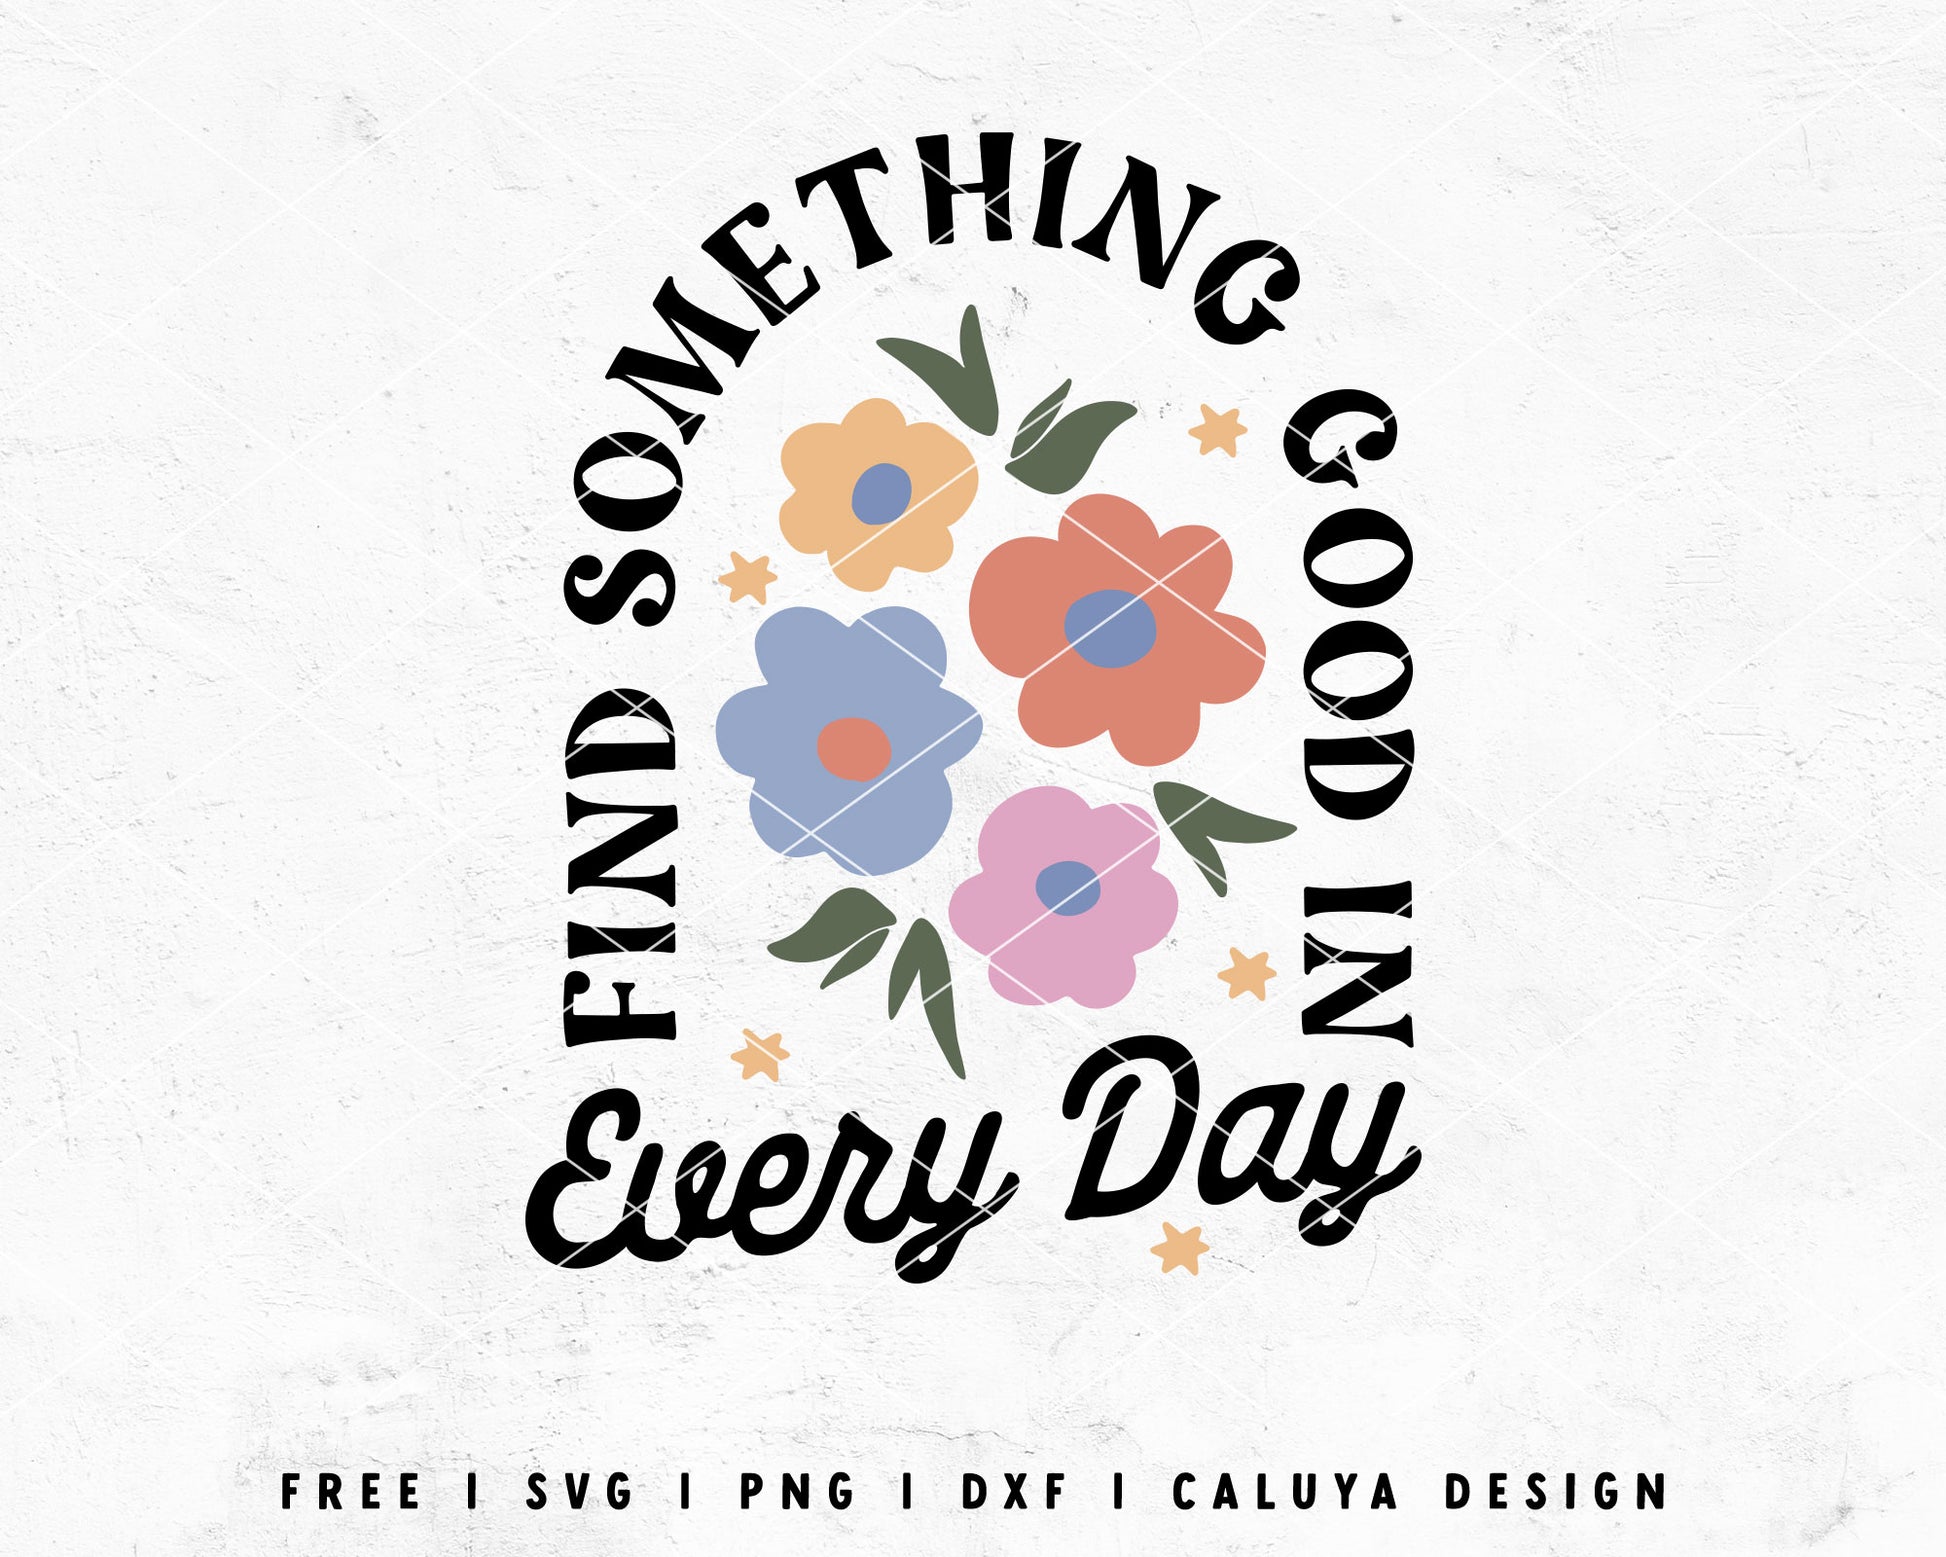 FREE Inspirational SVG | Matisse Flower SVG Cut File for Cricut, Cameo Silhouette | Free SVG Cut File